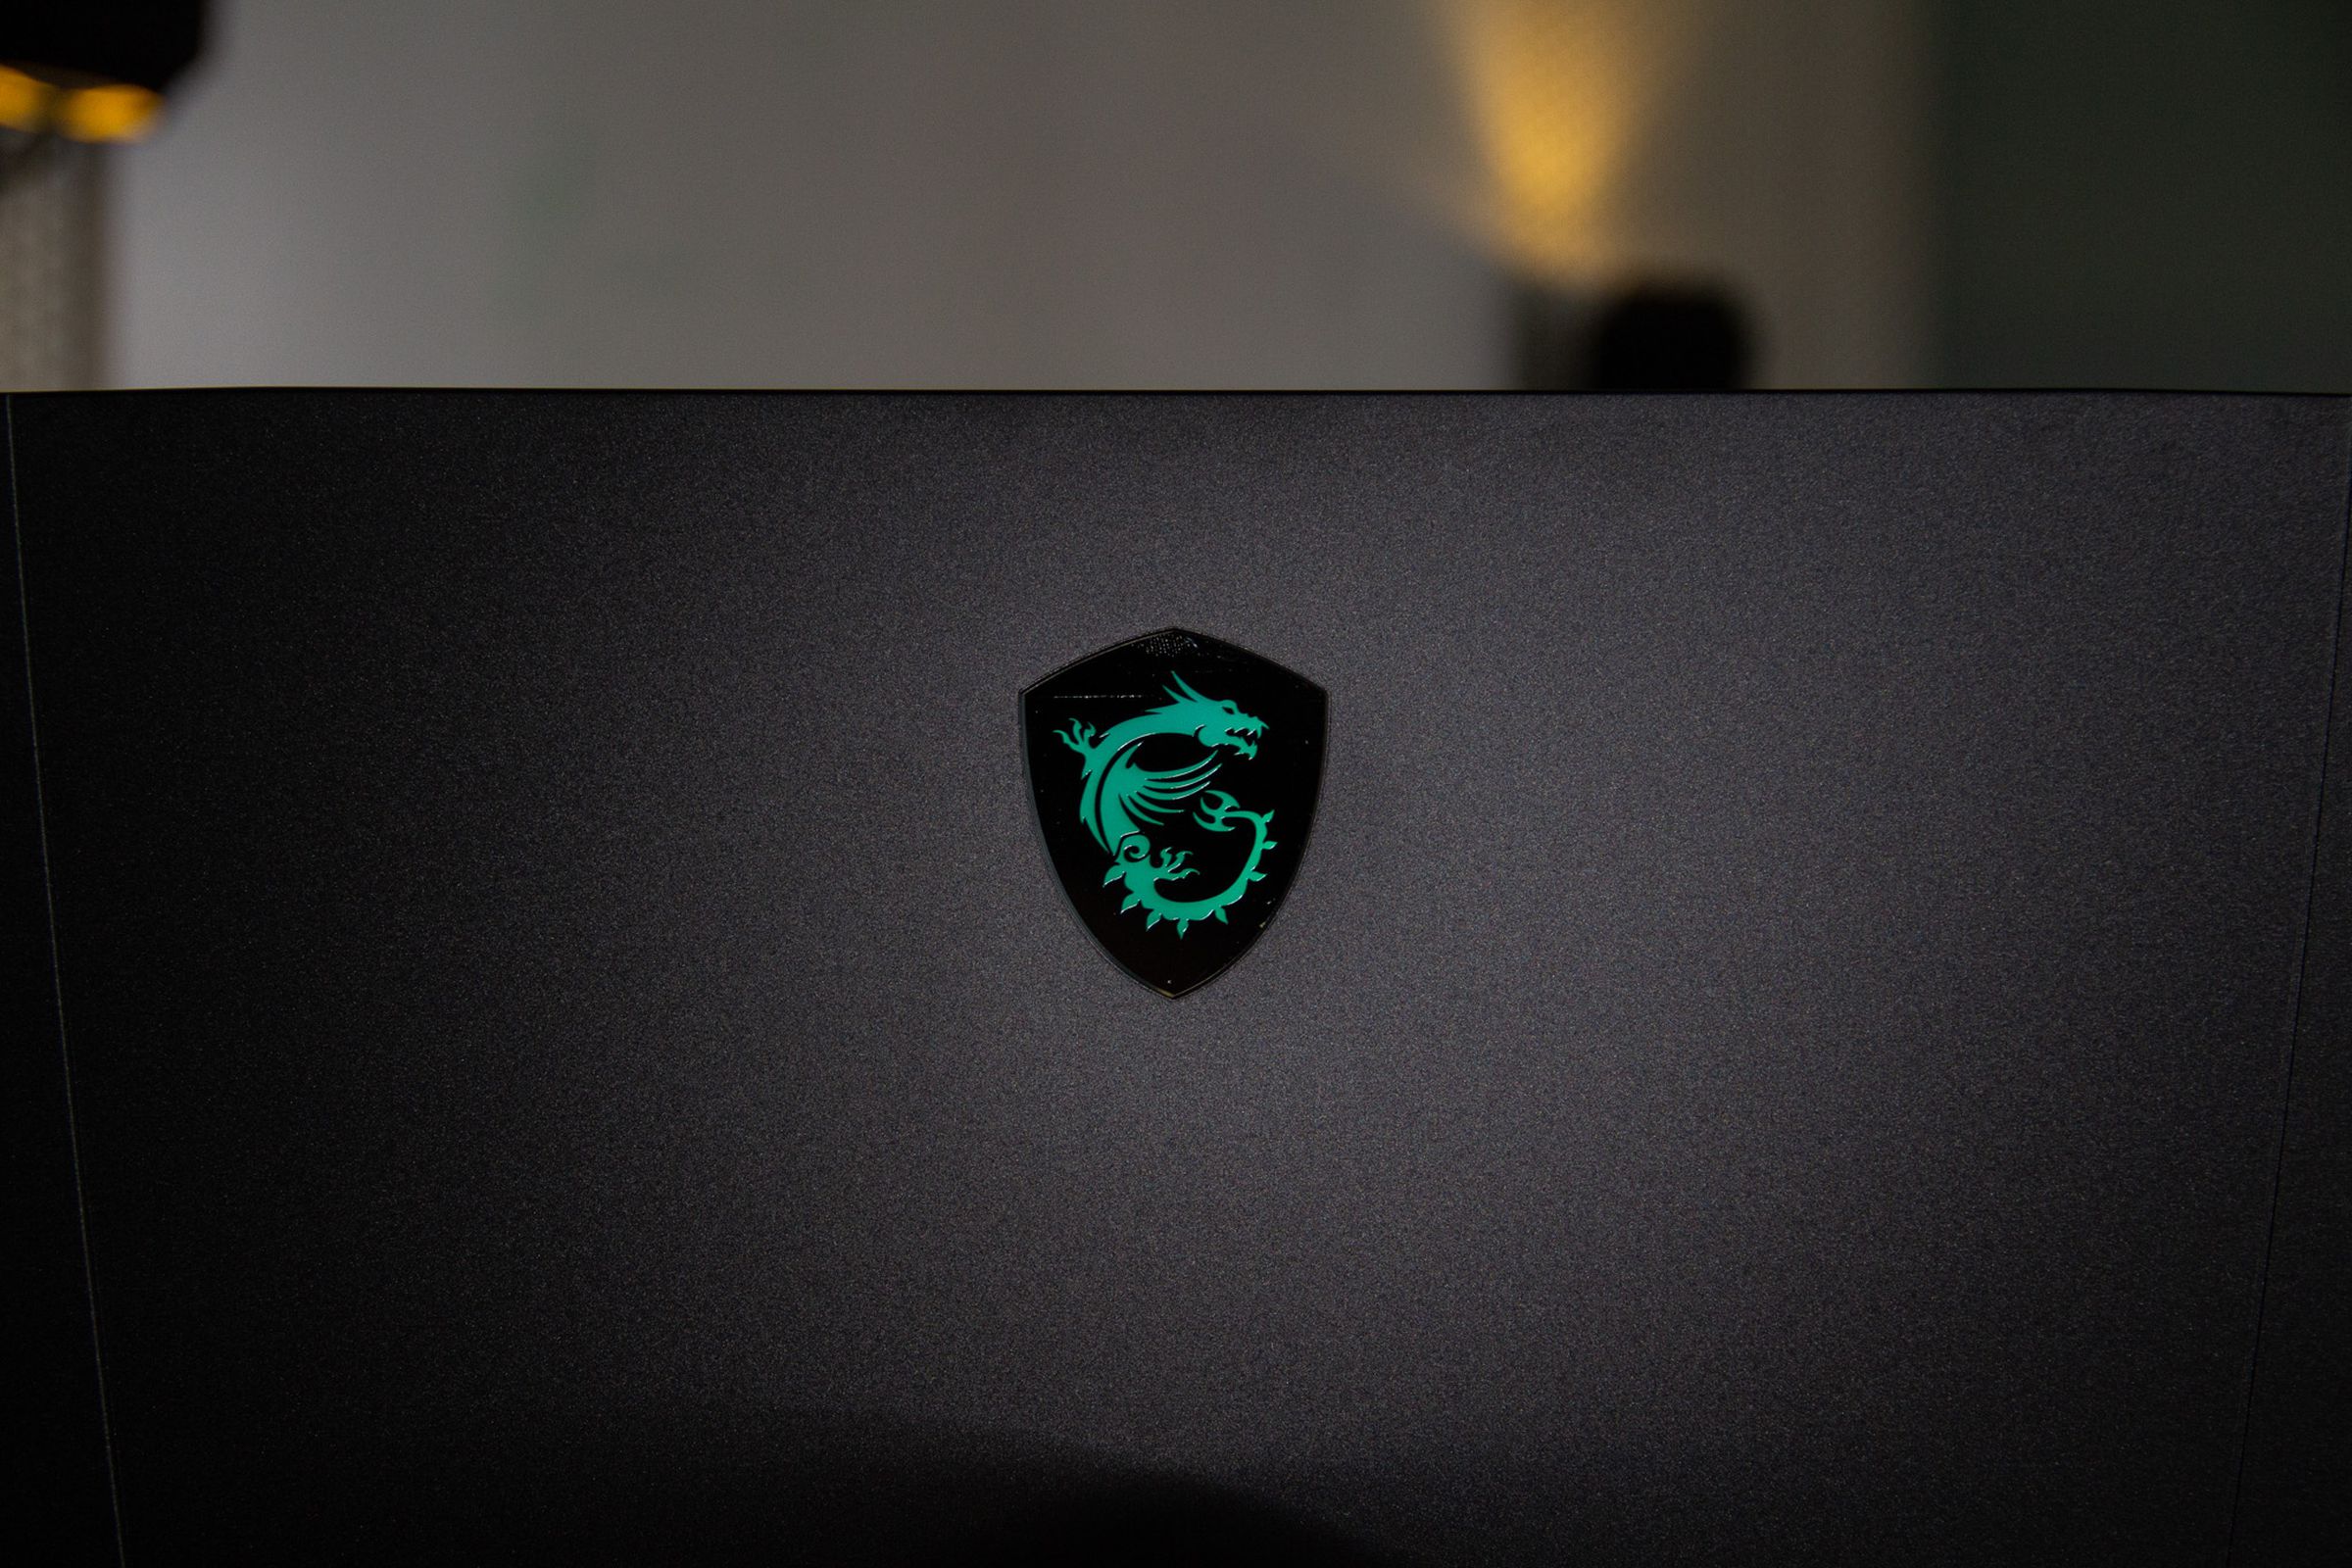 The MSI dragon on the lid of the Titan GT77 HX.